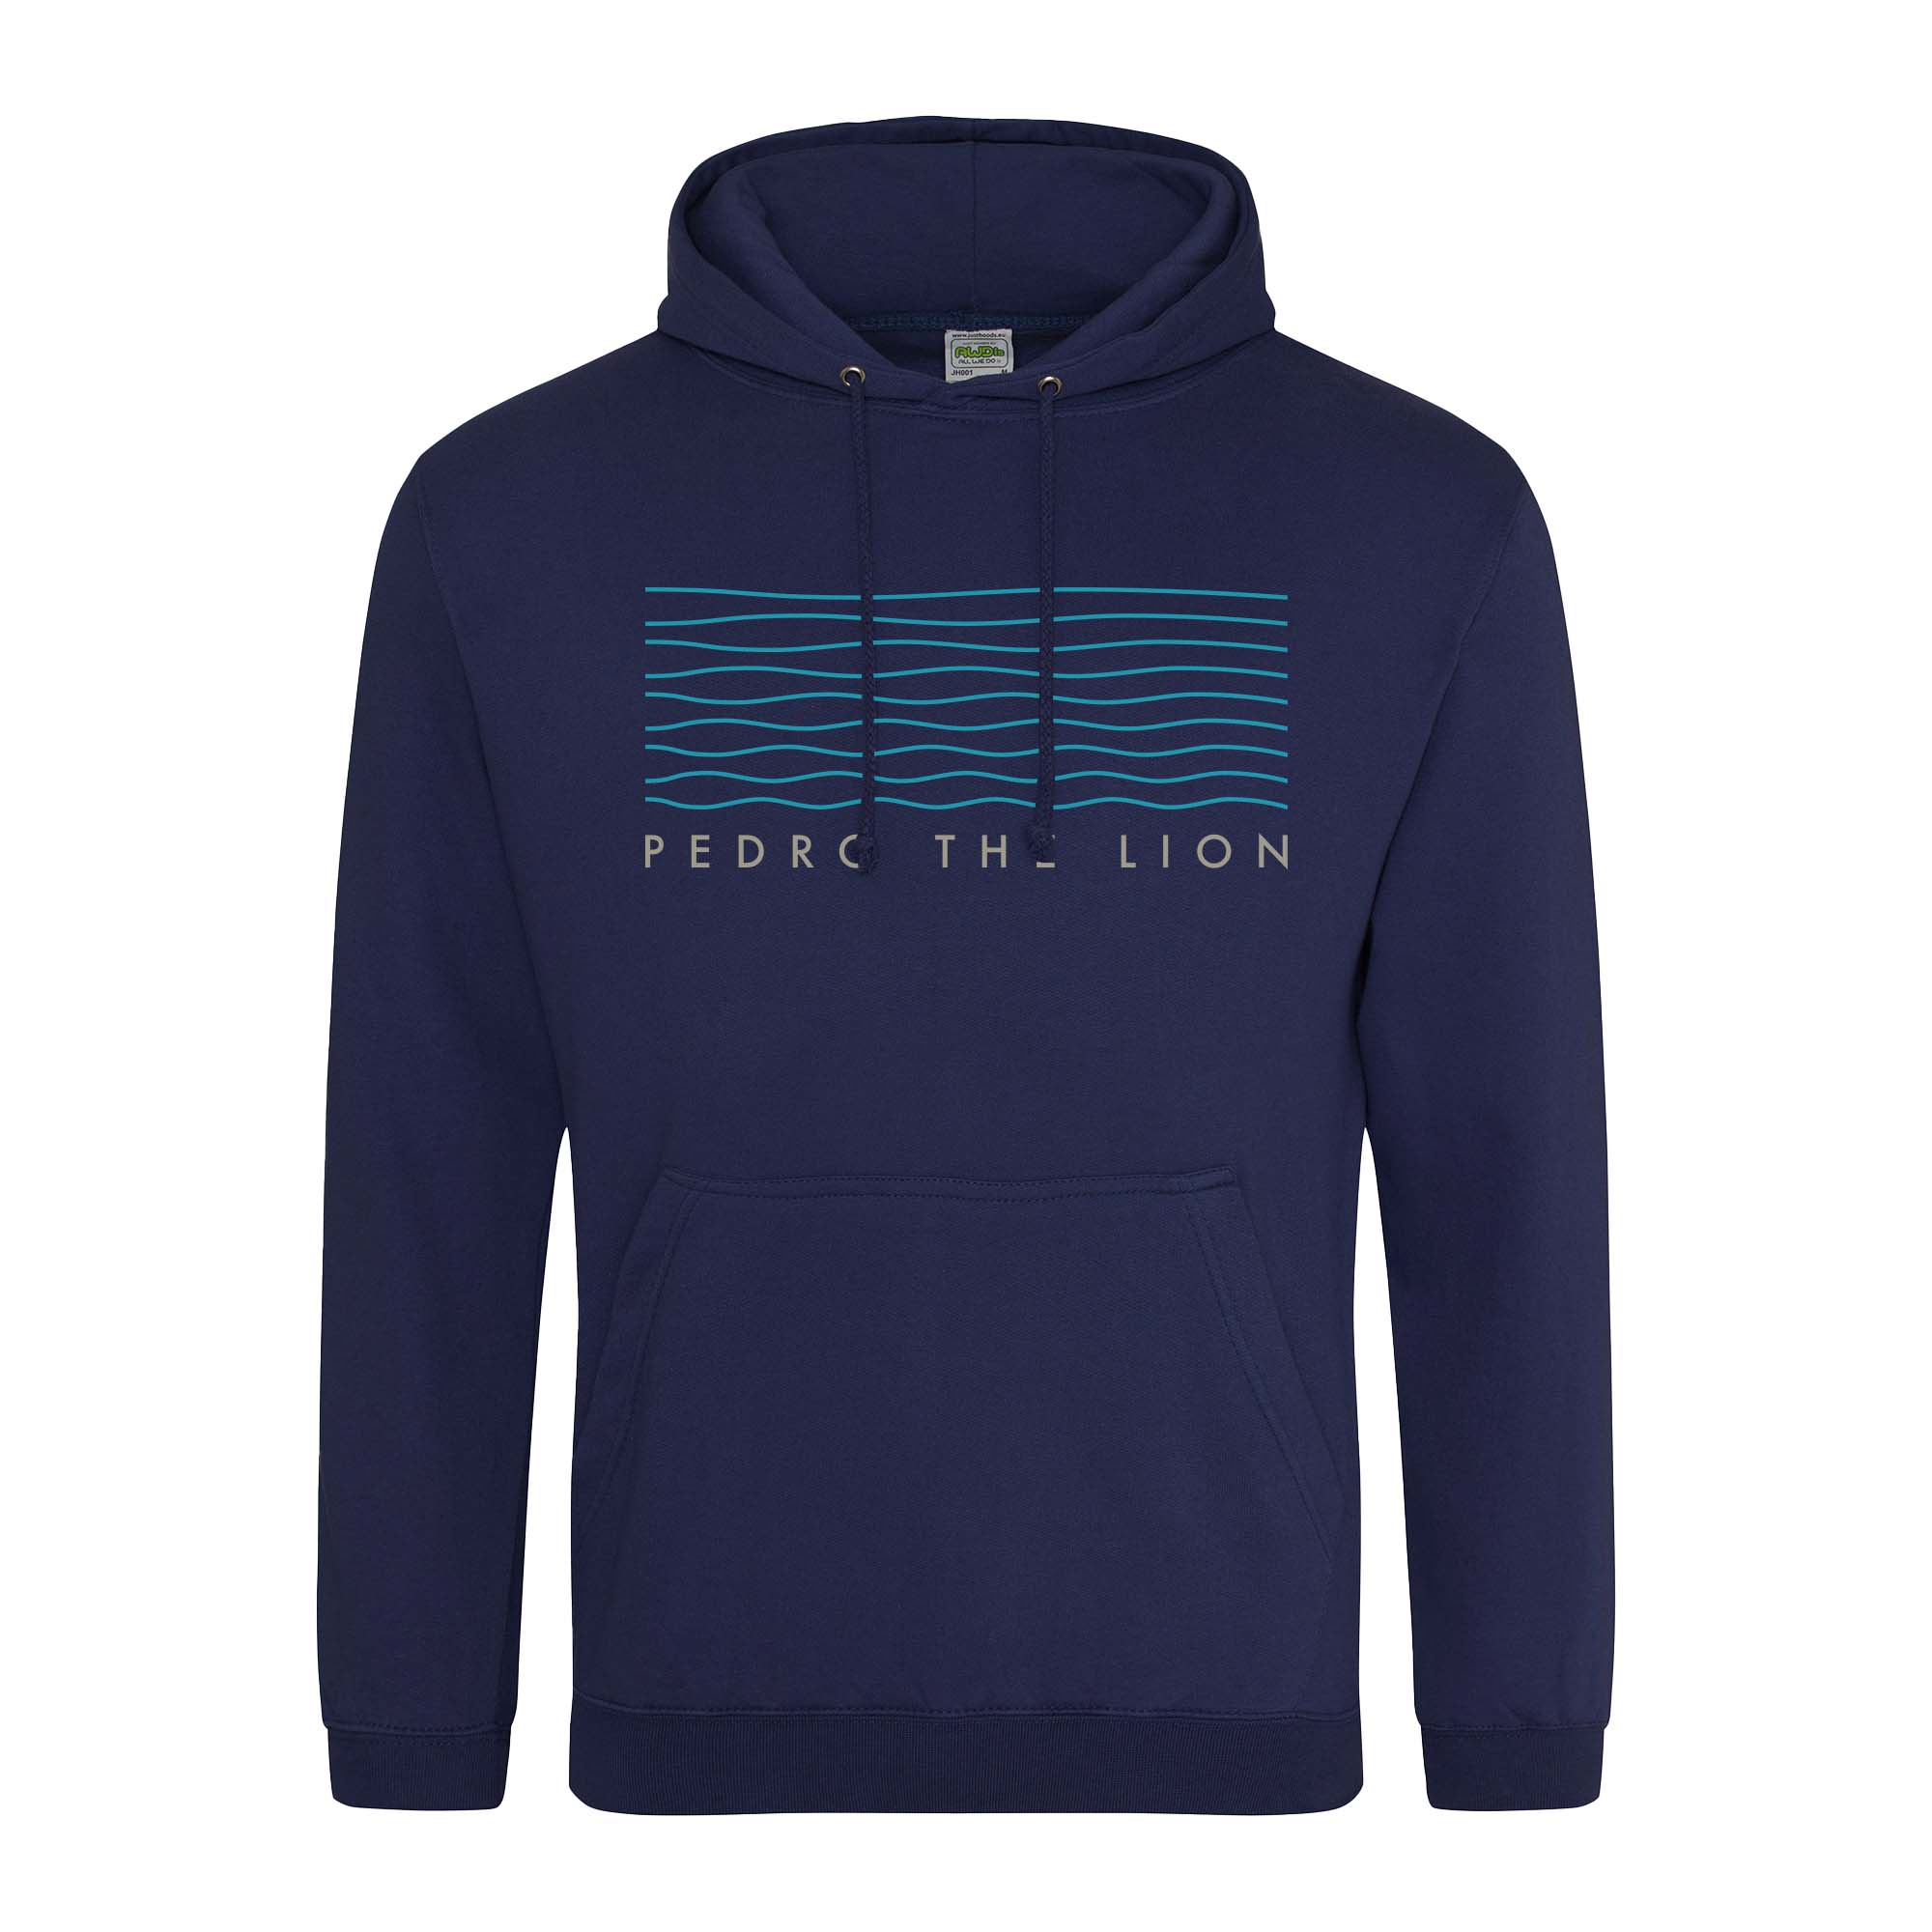 Pedro the Lion Waves Hoodie